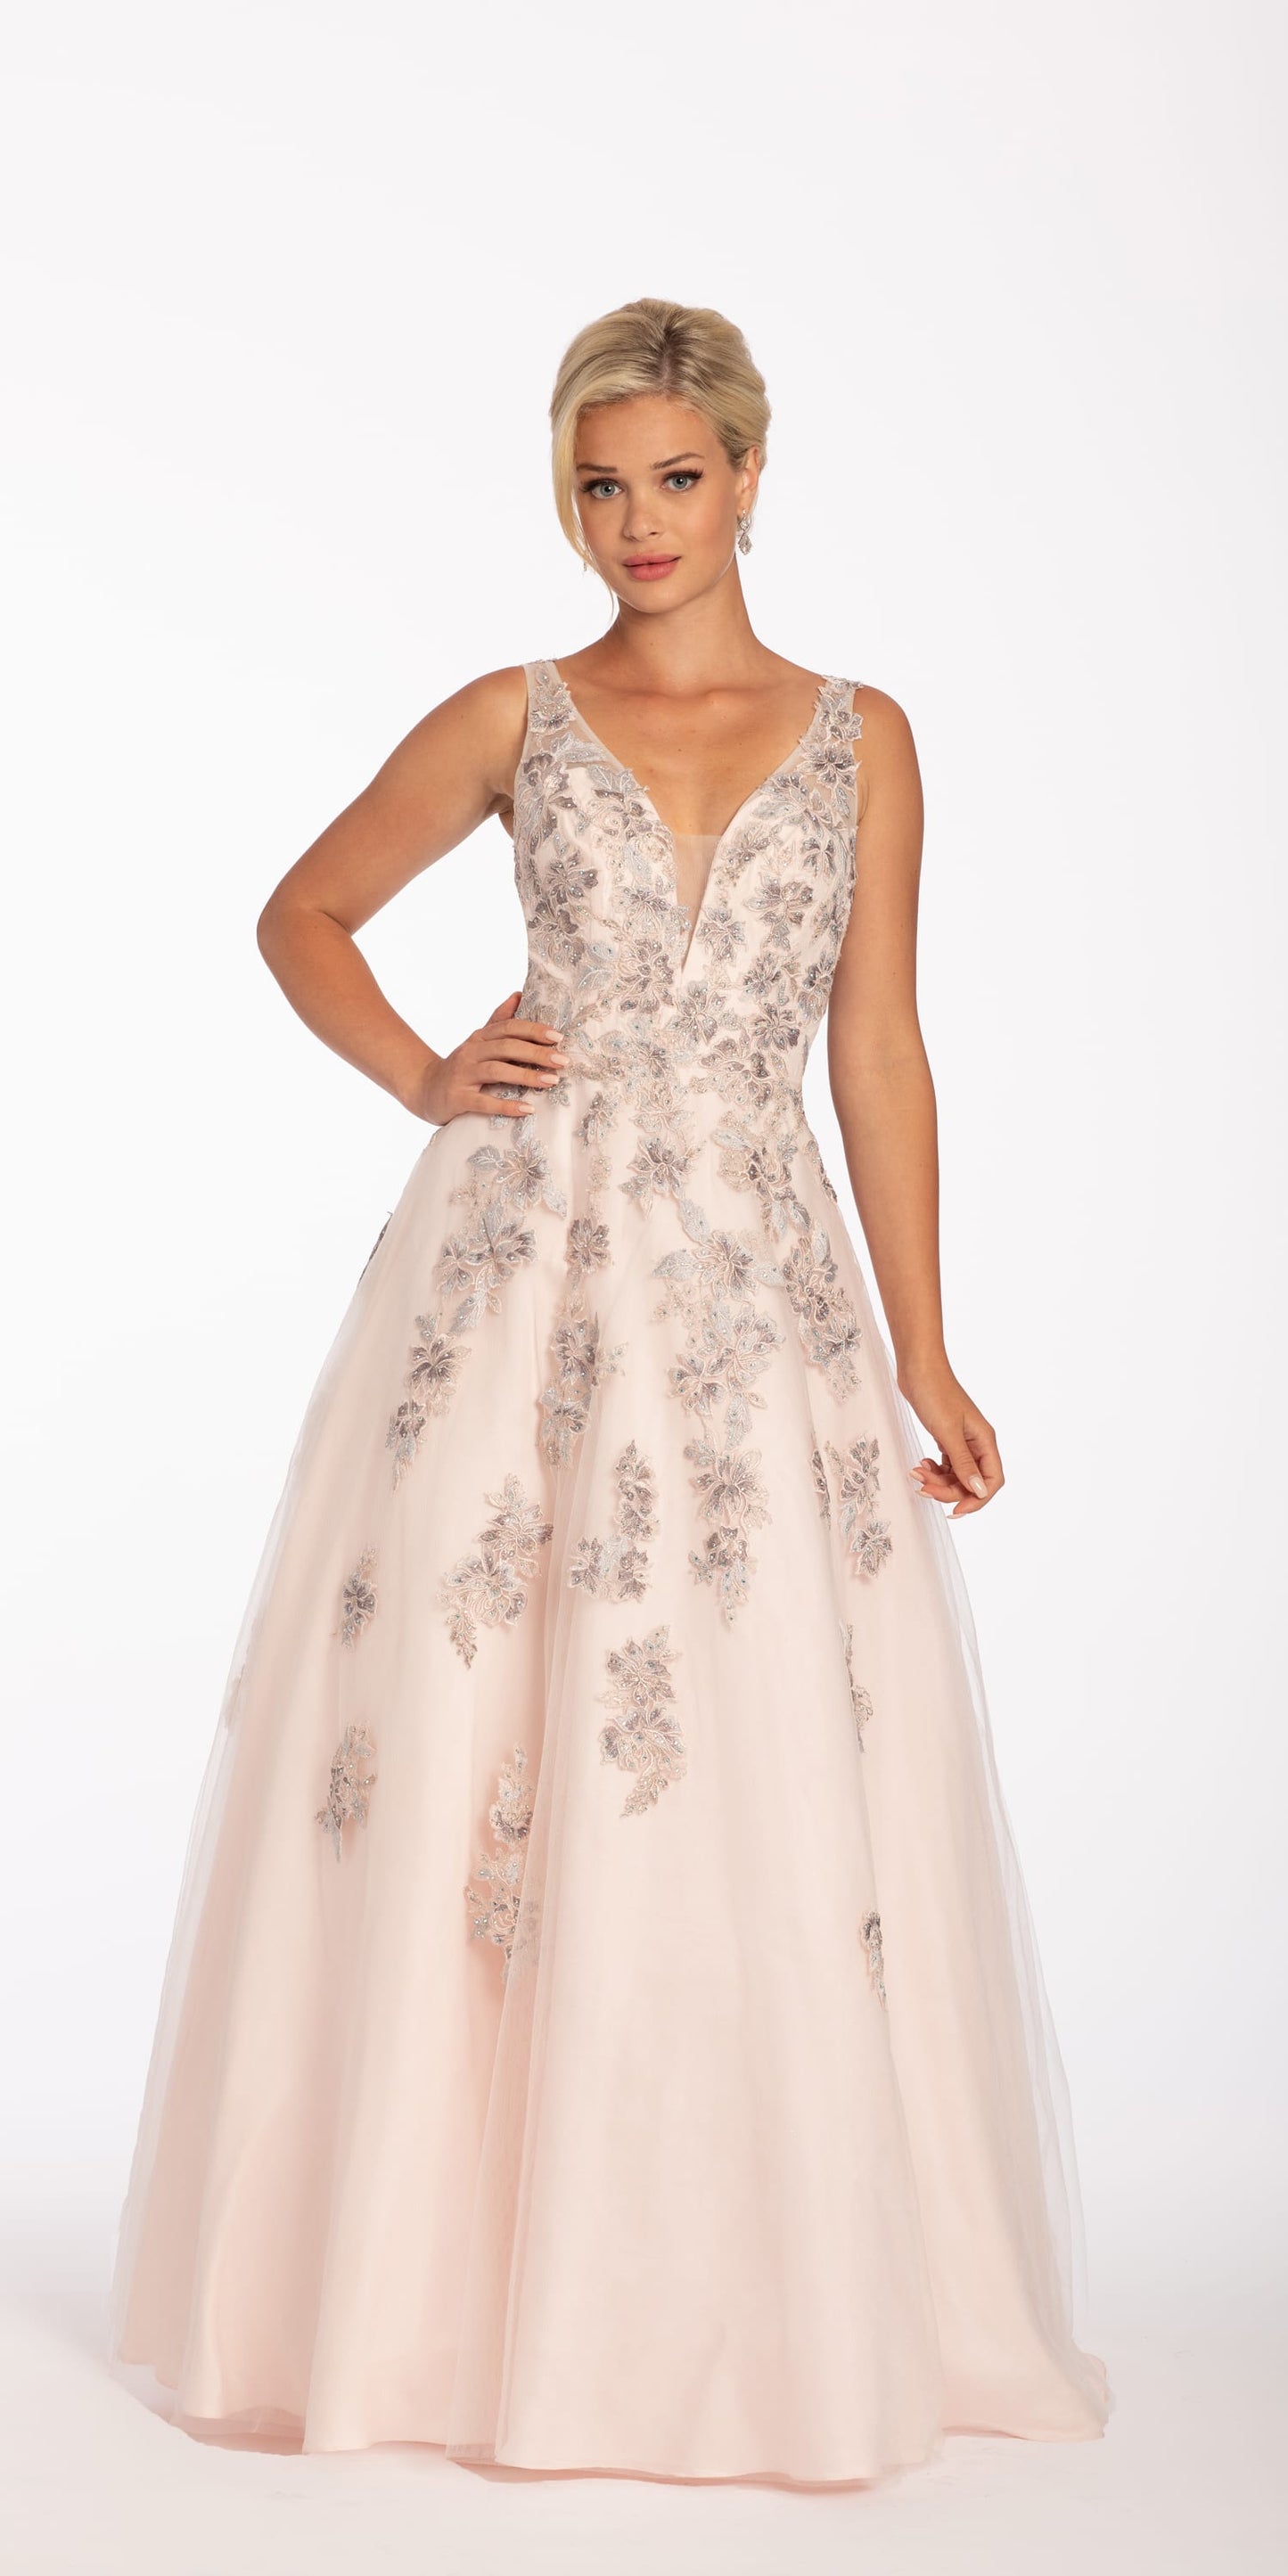 Camille La Vie Sweetheart Tulle Ballgown with Metallic Floral Applique missy / 0 / blush